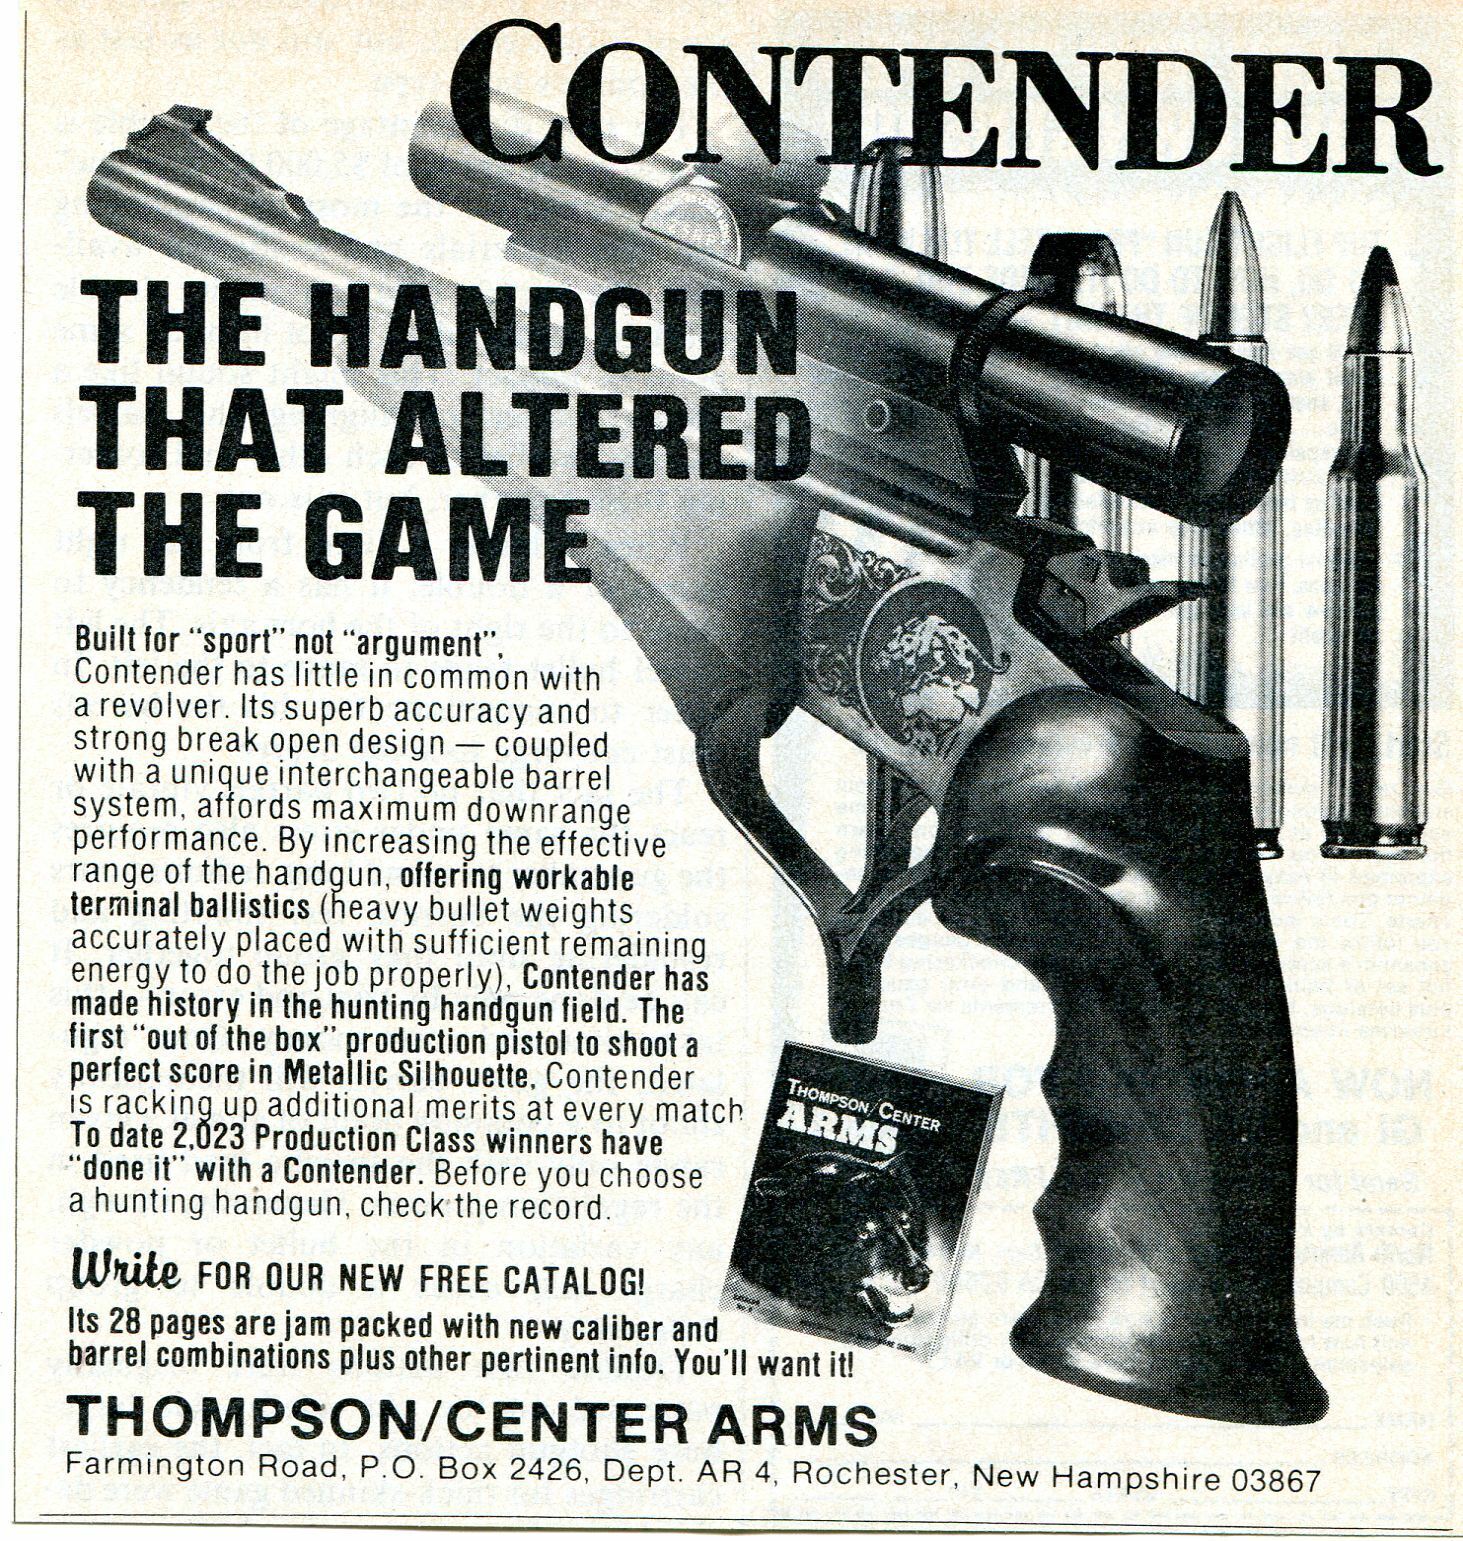 1981 small Print Ad Thompson Center Arms Contender Pistol sport not argument